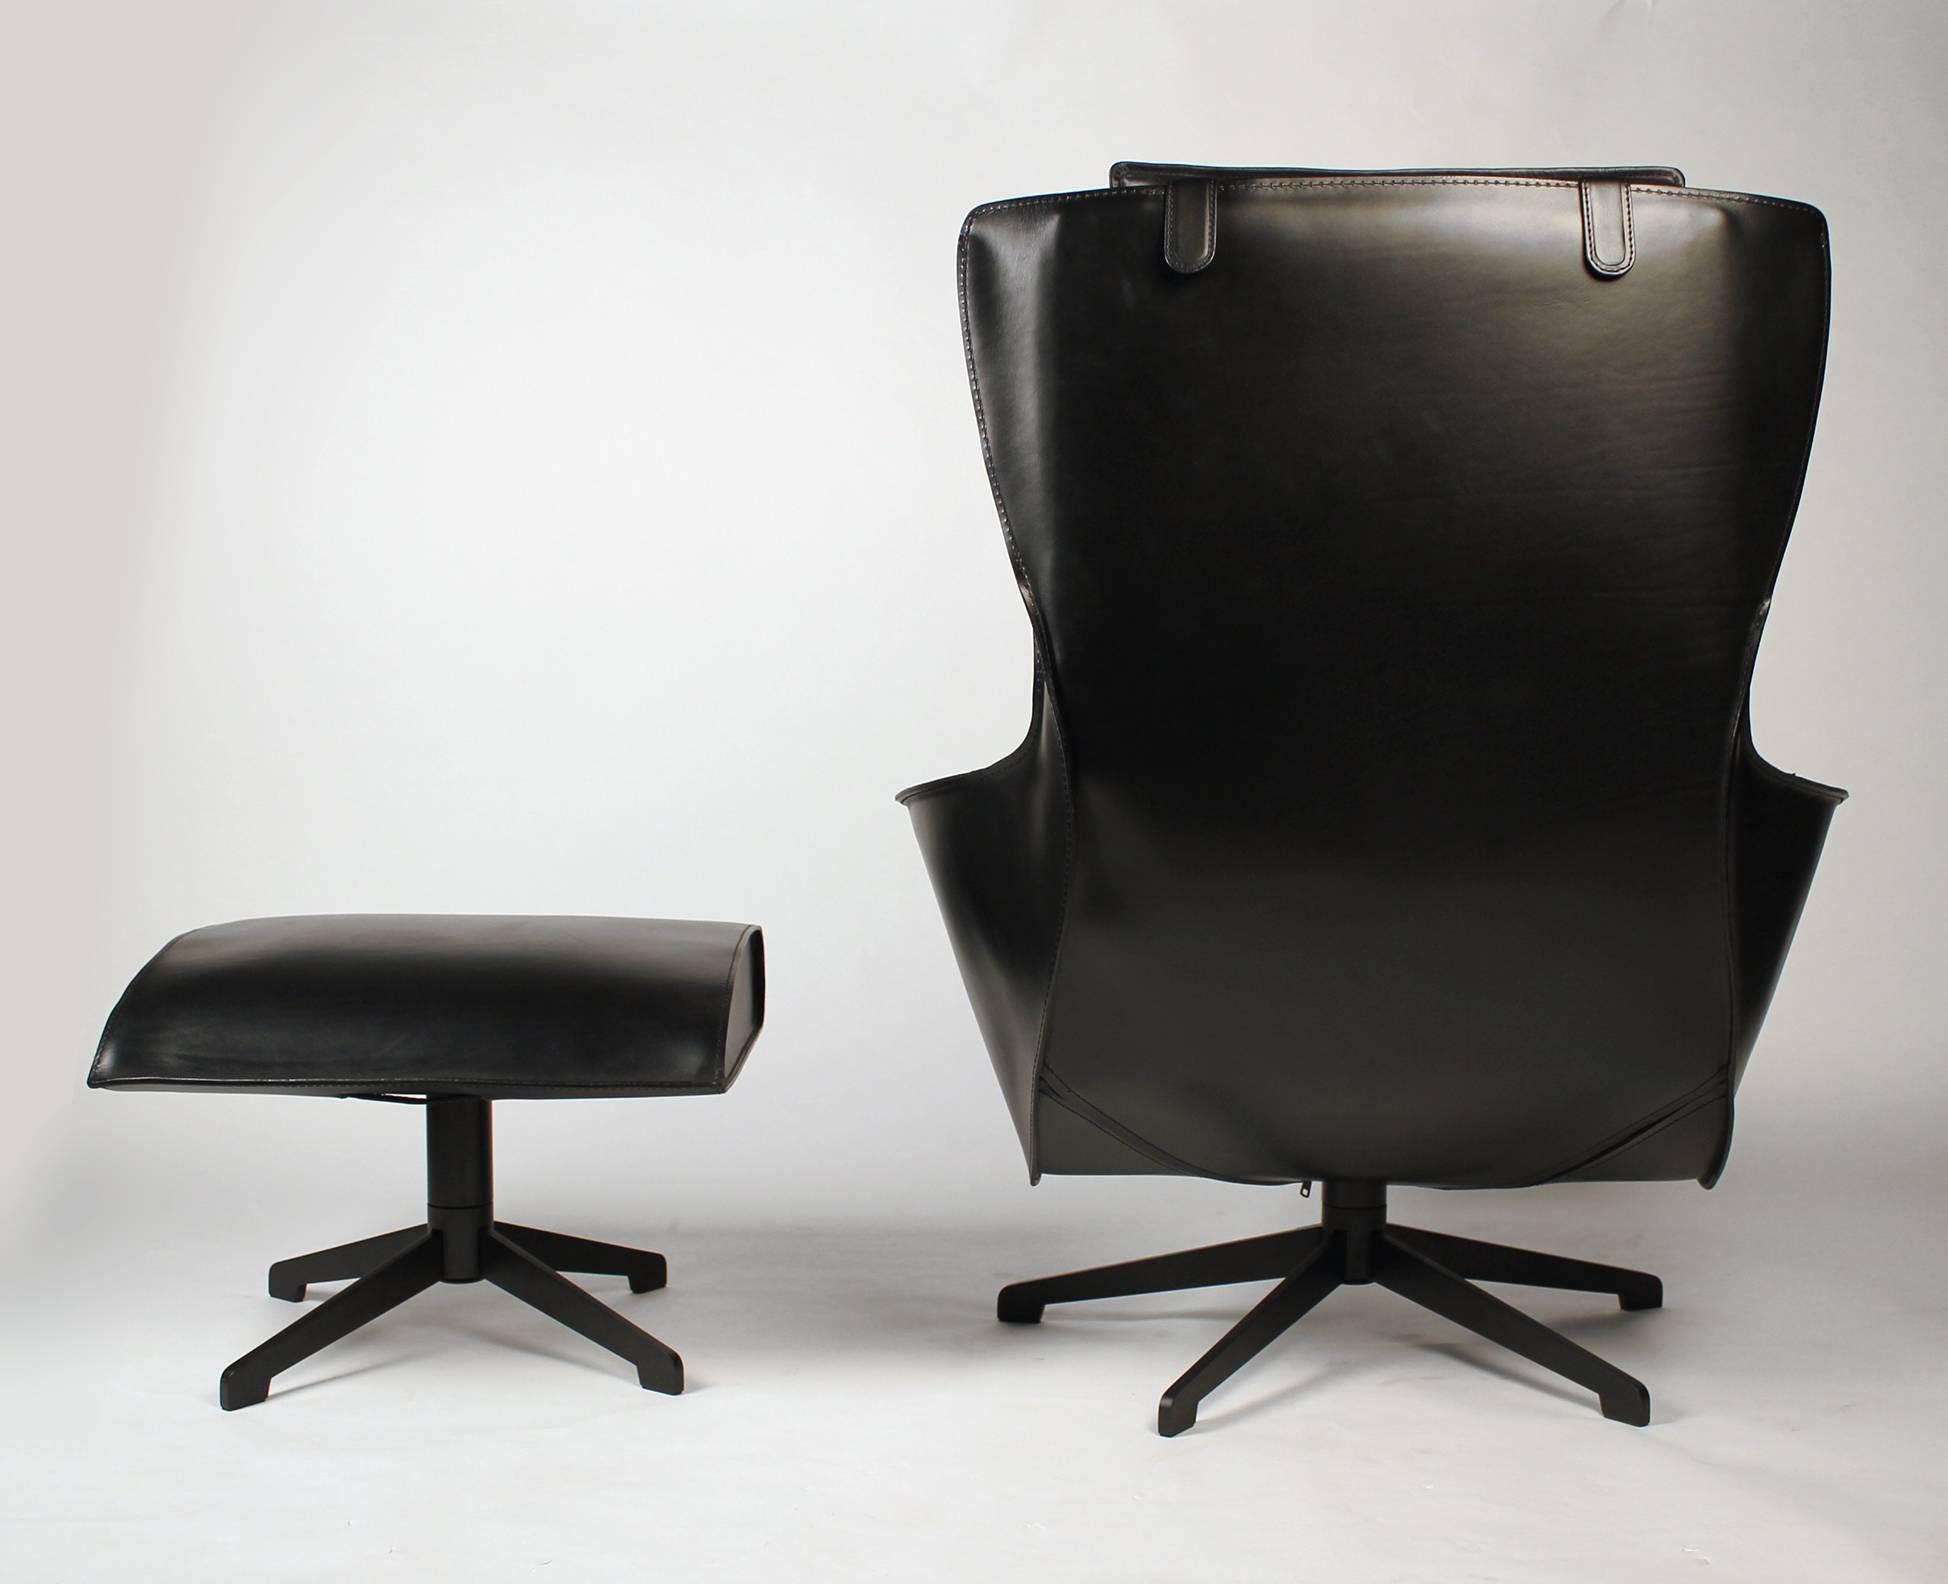 Modern Pair of Mario Bellini Model 423 Cab Lounge Chairs with Swivel Ottoman by Cassina